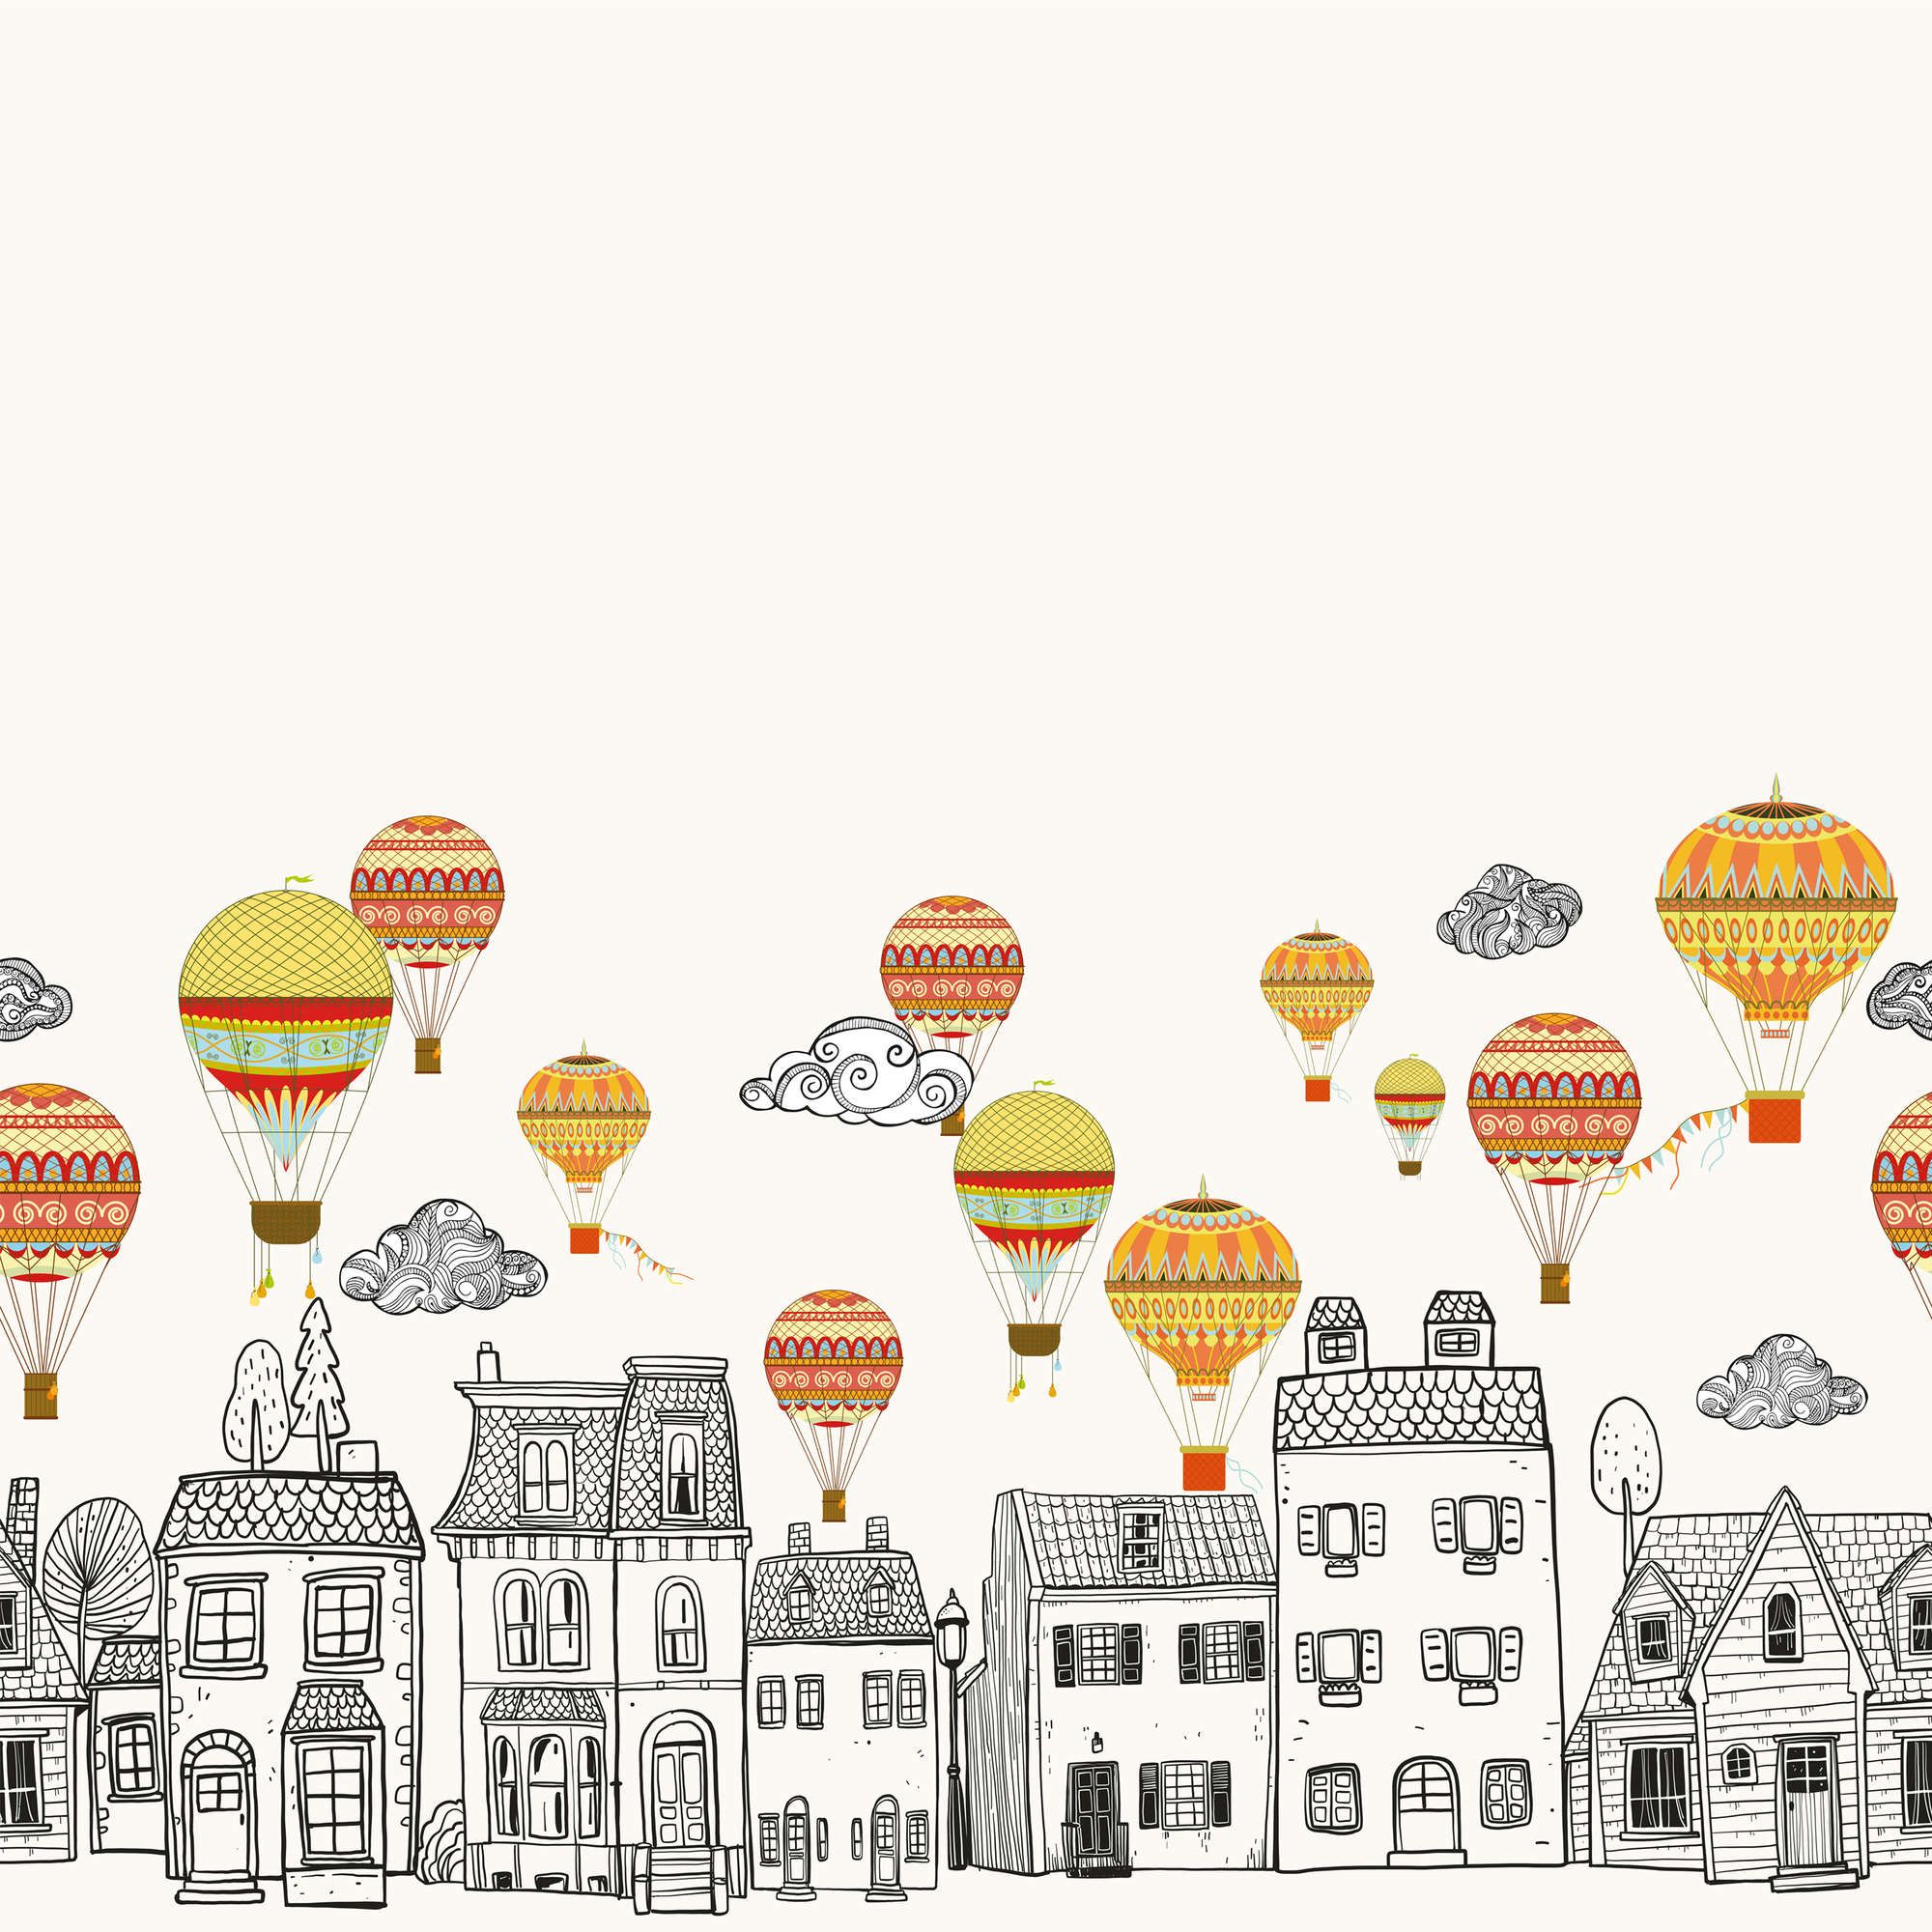             Small Town with Hot Air Balloons Wallpaper - Smooth & Light Gloss Non-woven
        